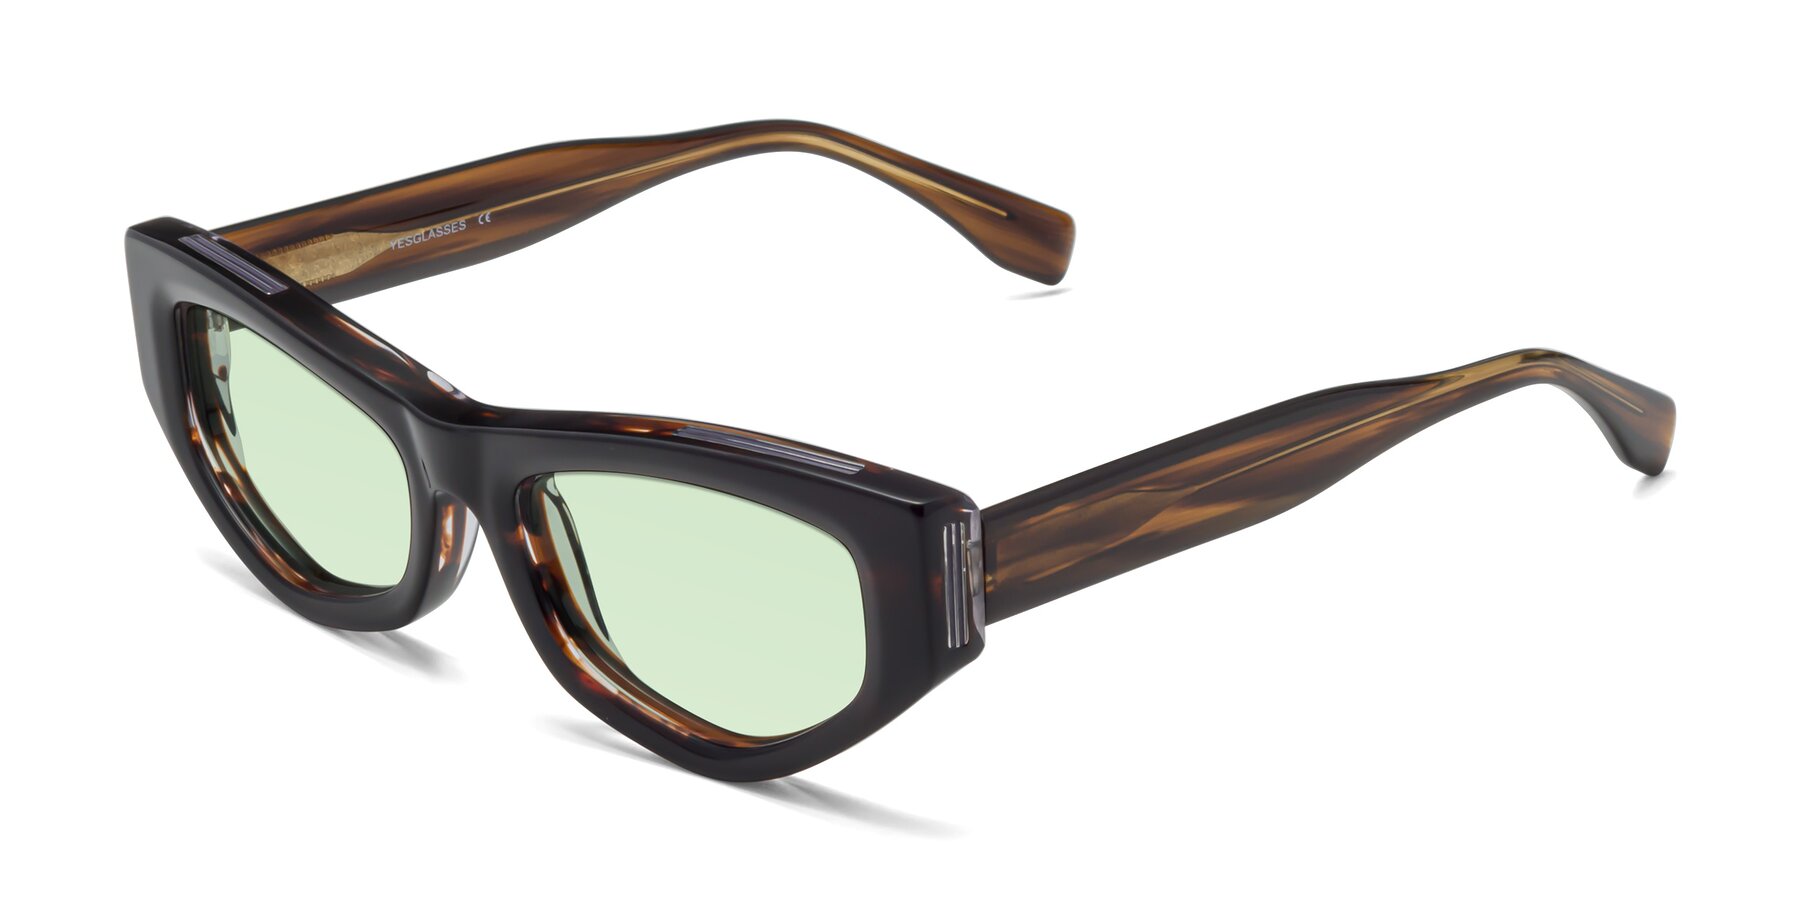 Angle of 1313 in Brown with Light Green Tinted Lenses